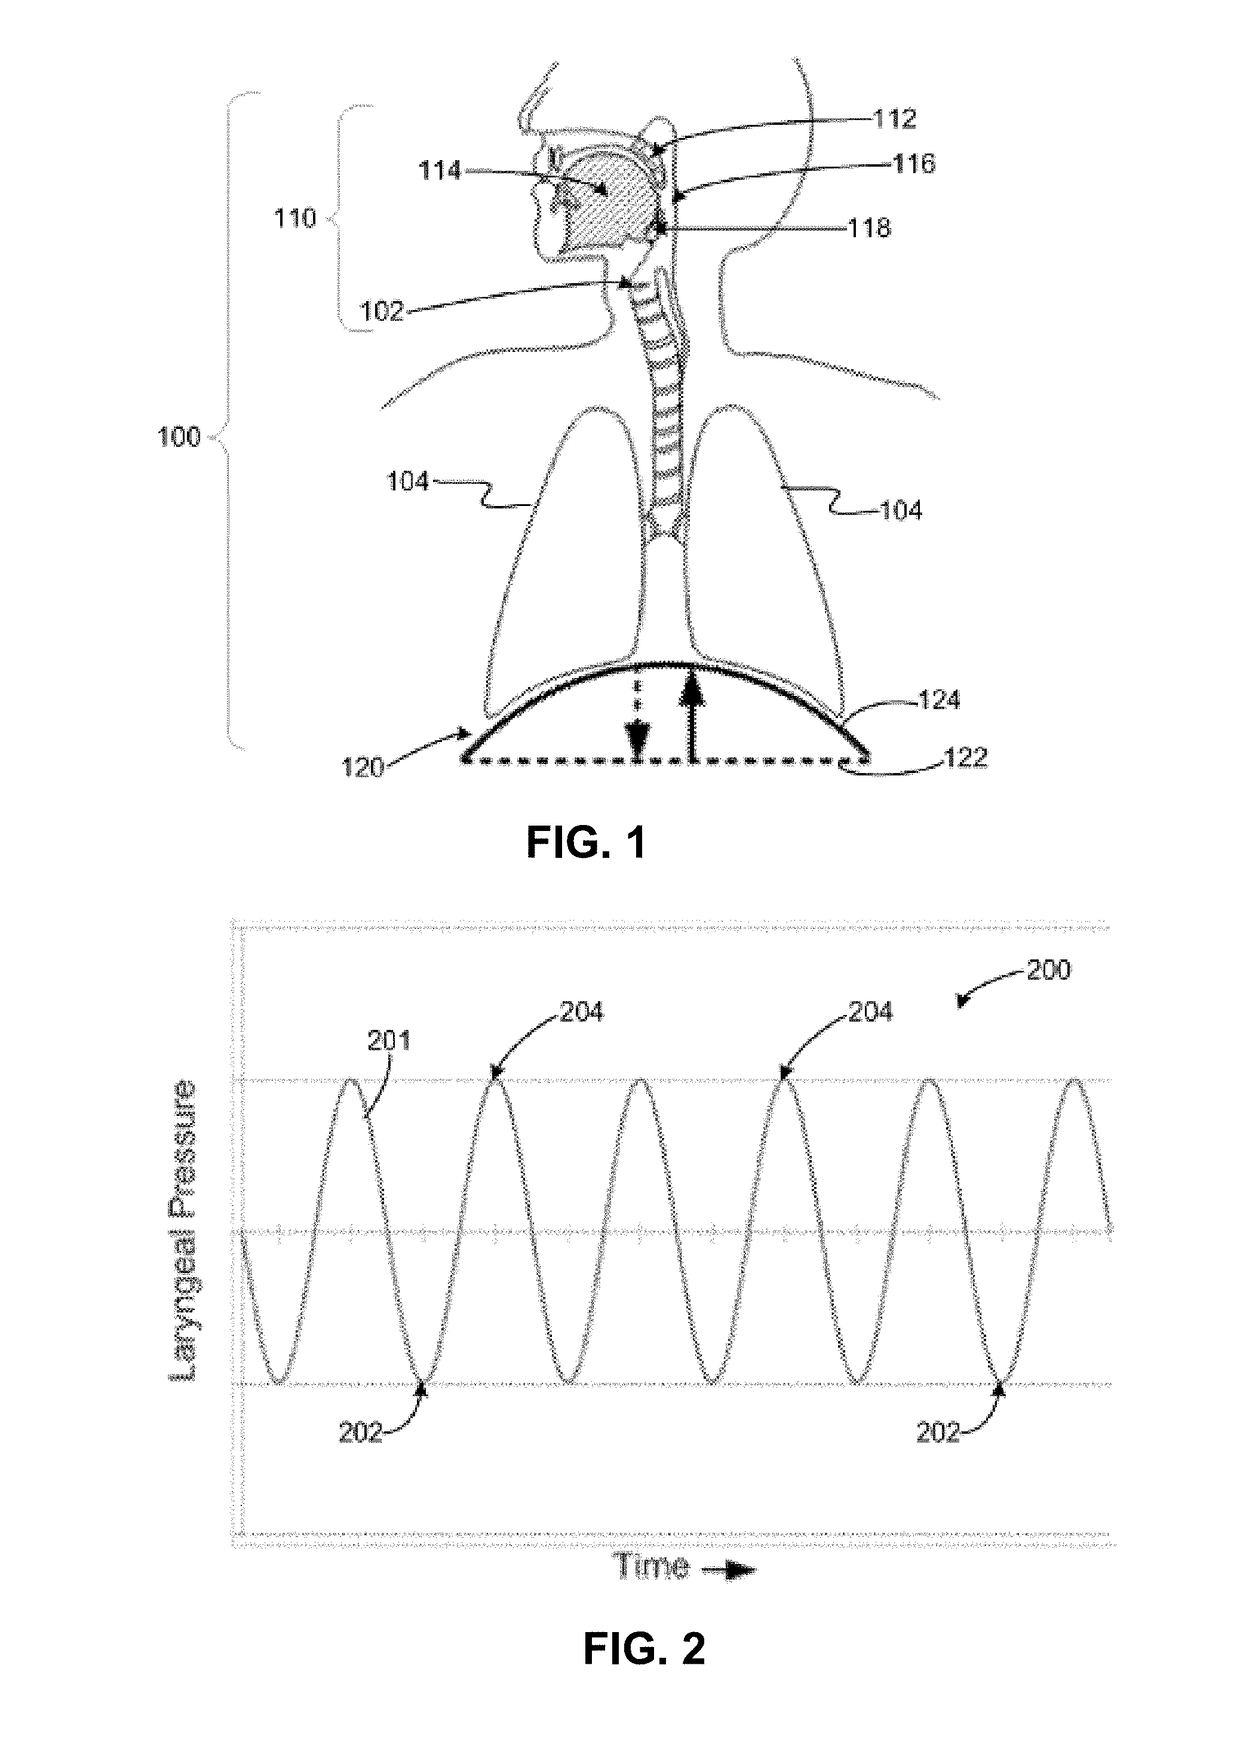 Neural monitoring methods and systems for treating upper airway disorders